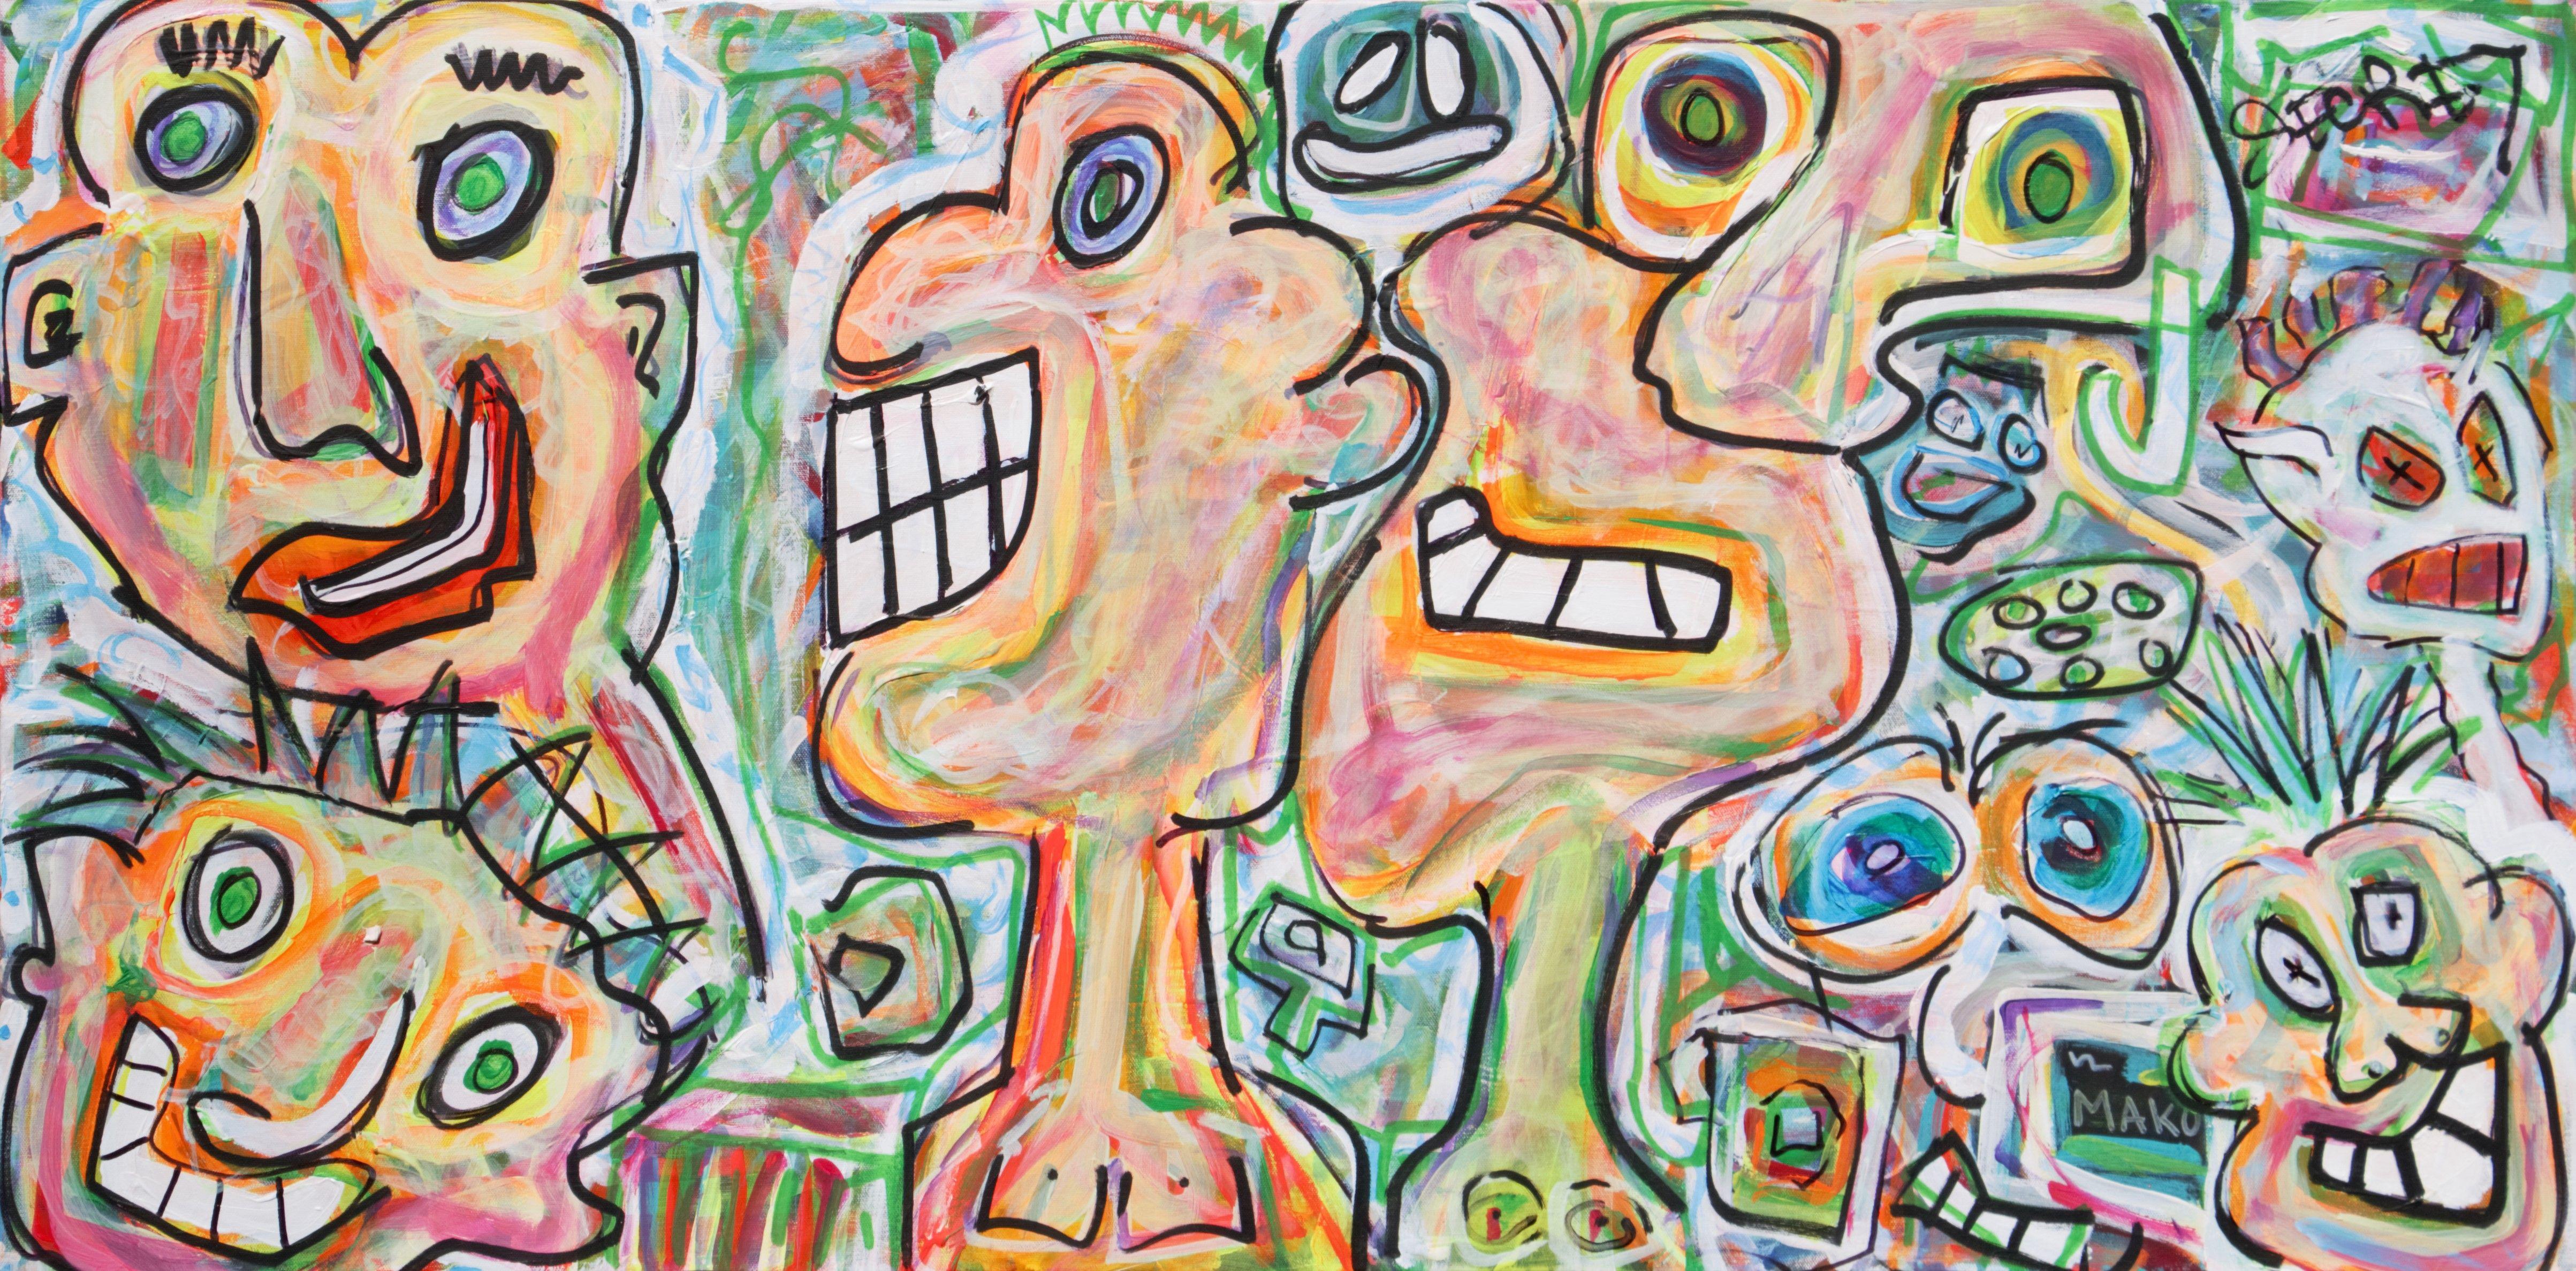 Jason Piken Abstract Painting - Faces, Painting, Acrylic on Canvas